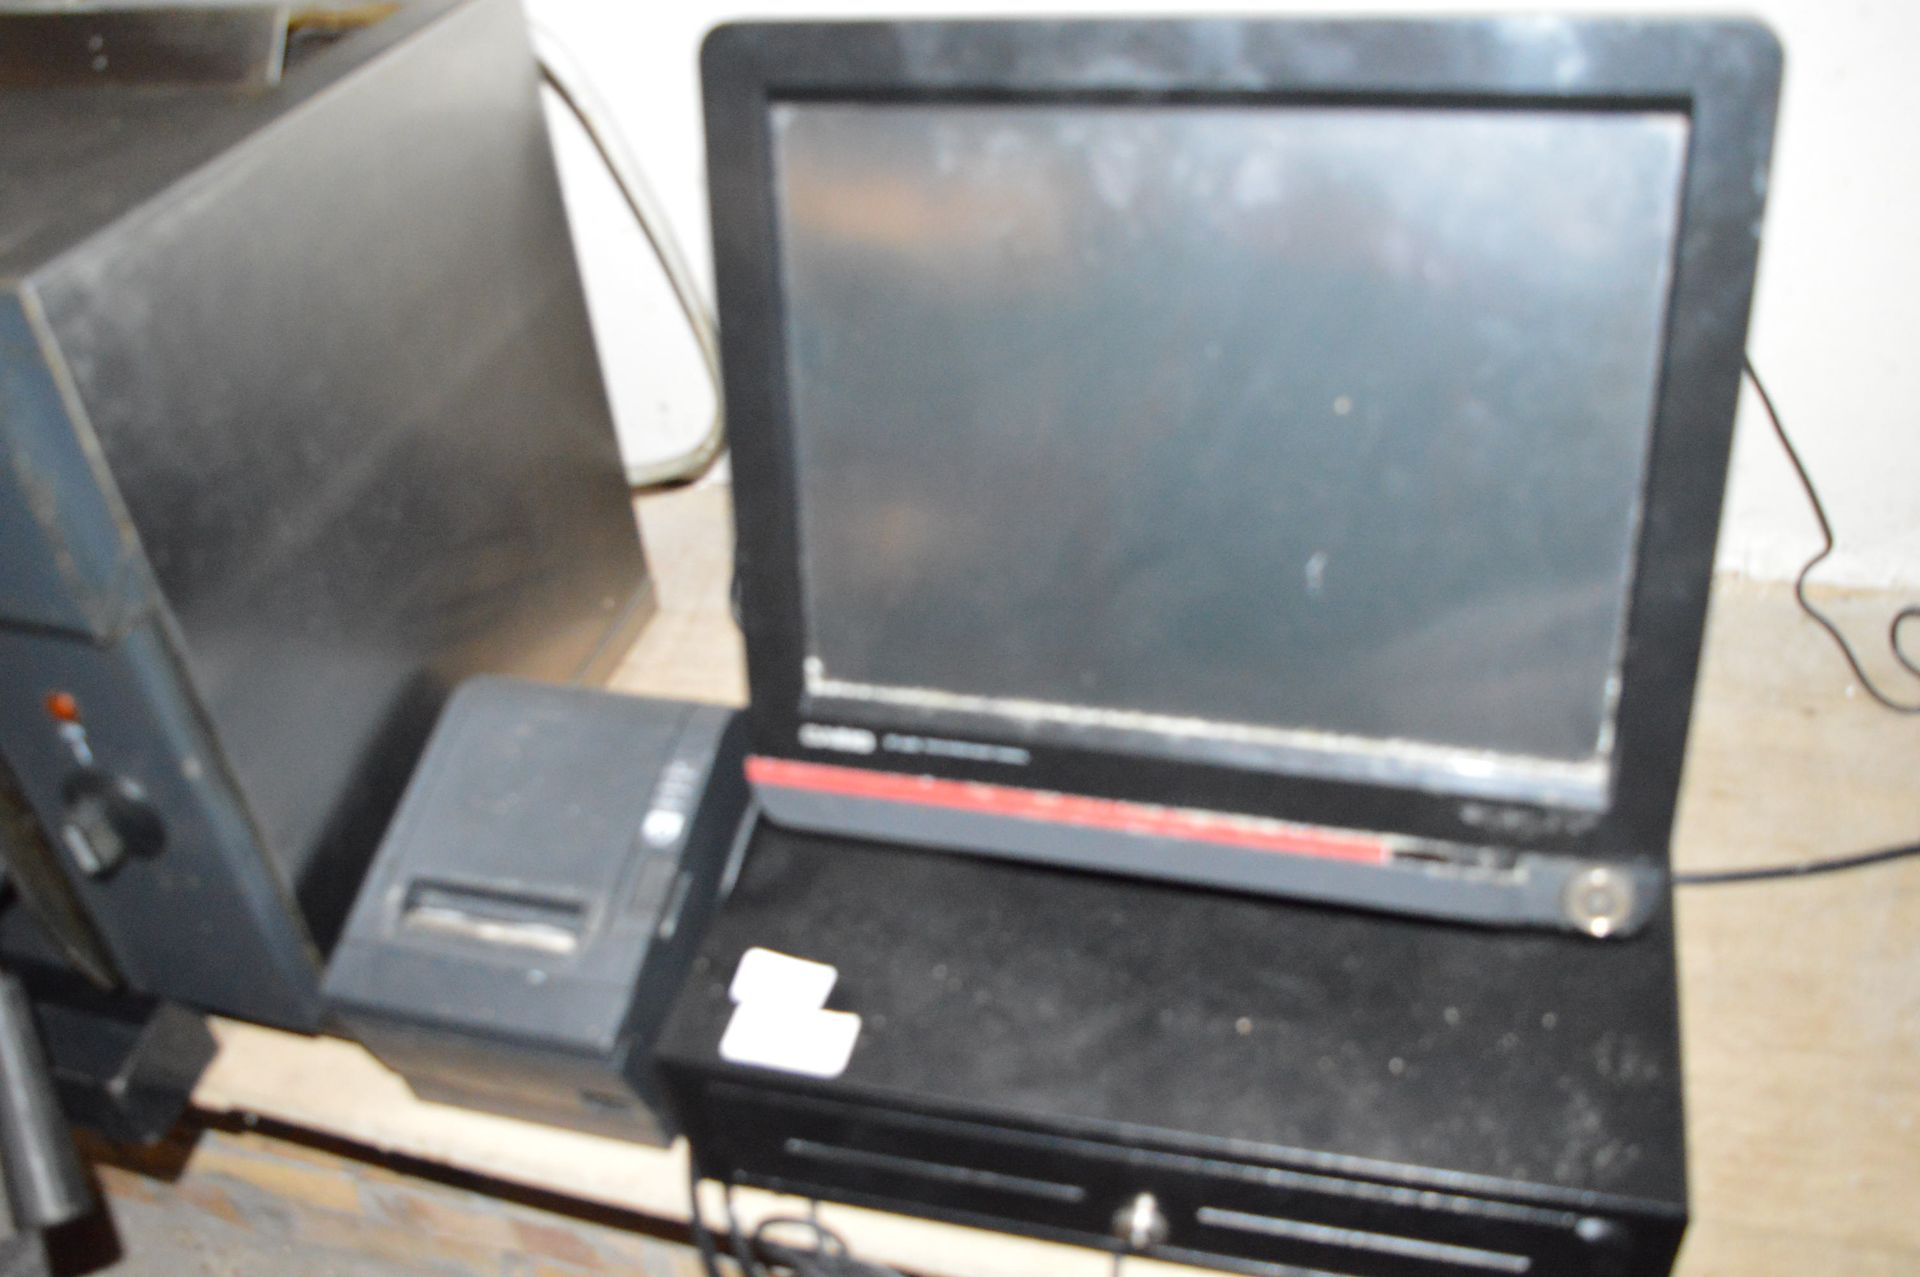 Casio QT-6600 POS System with Label Printer - Image 2 of 2